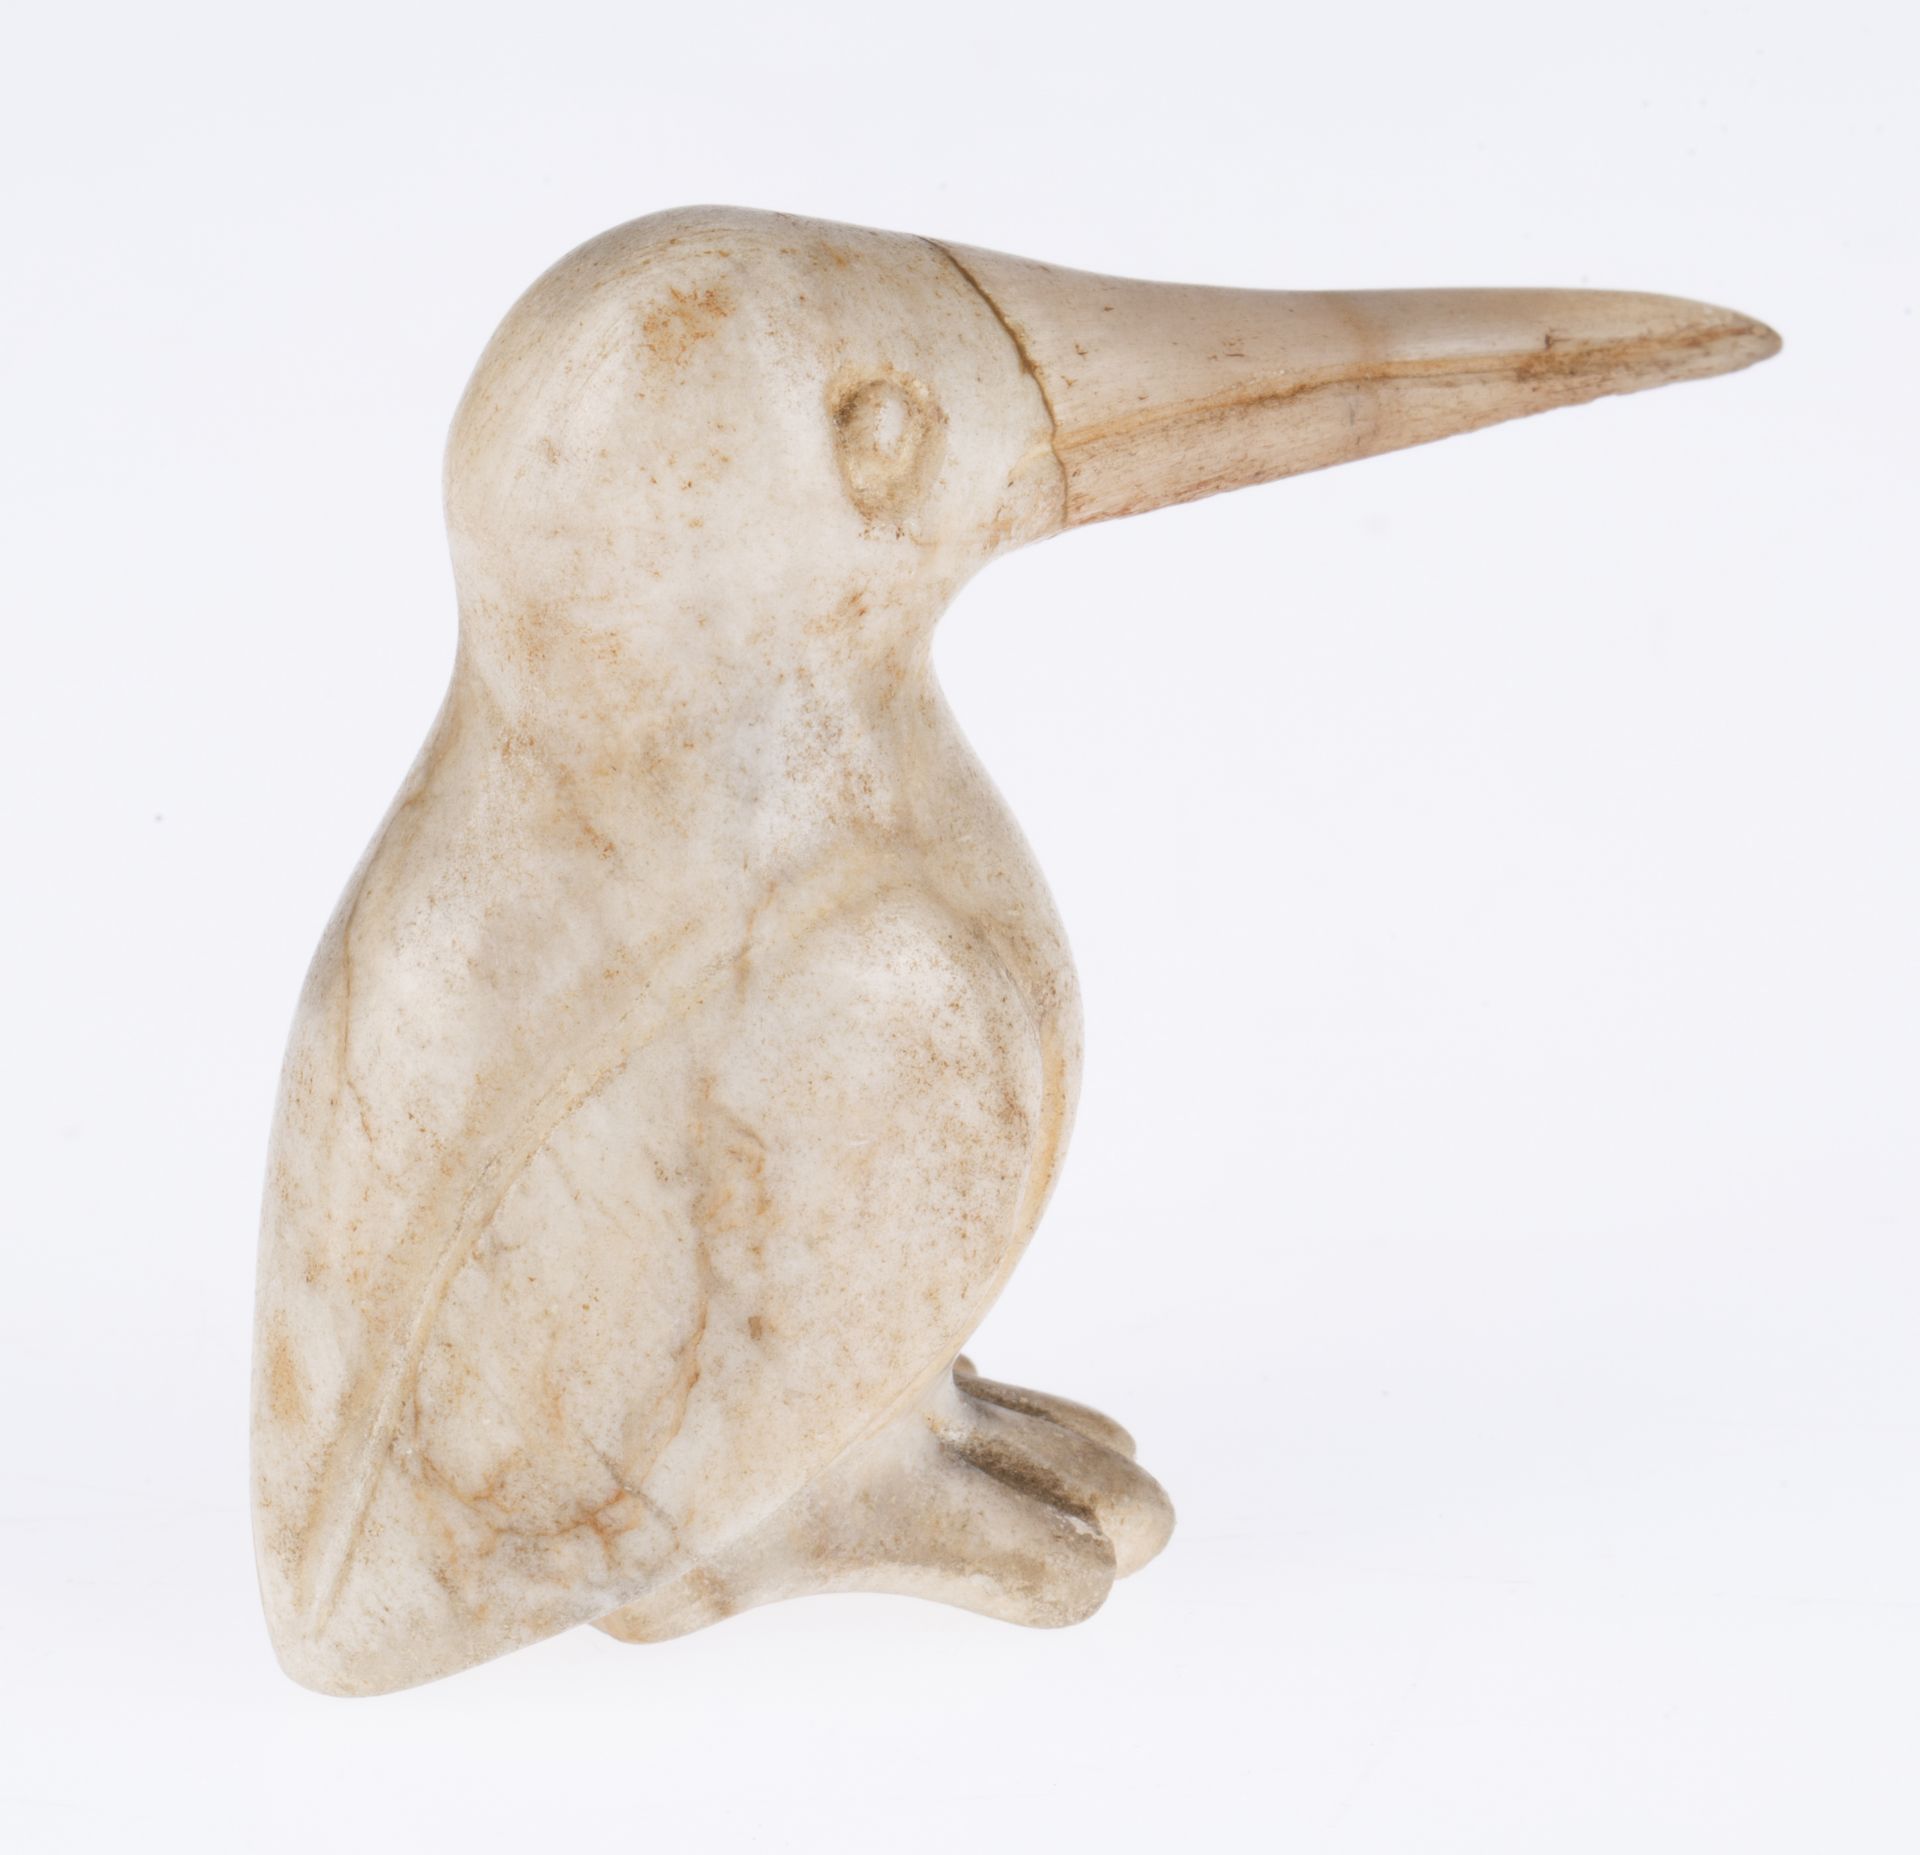 EARLY 20TH CENTURY RUSSIAN CARVED HARDSTONE PELICAN FIGURE [HAMMER GALLERIES] - Image 2 of 4